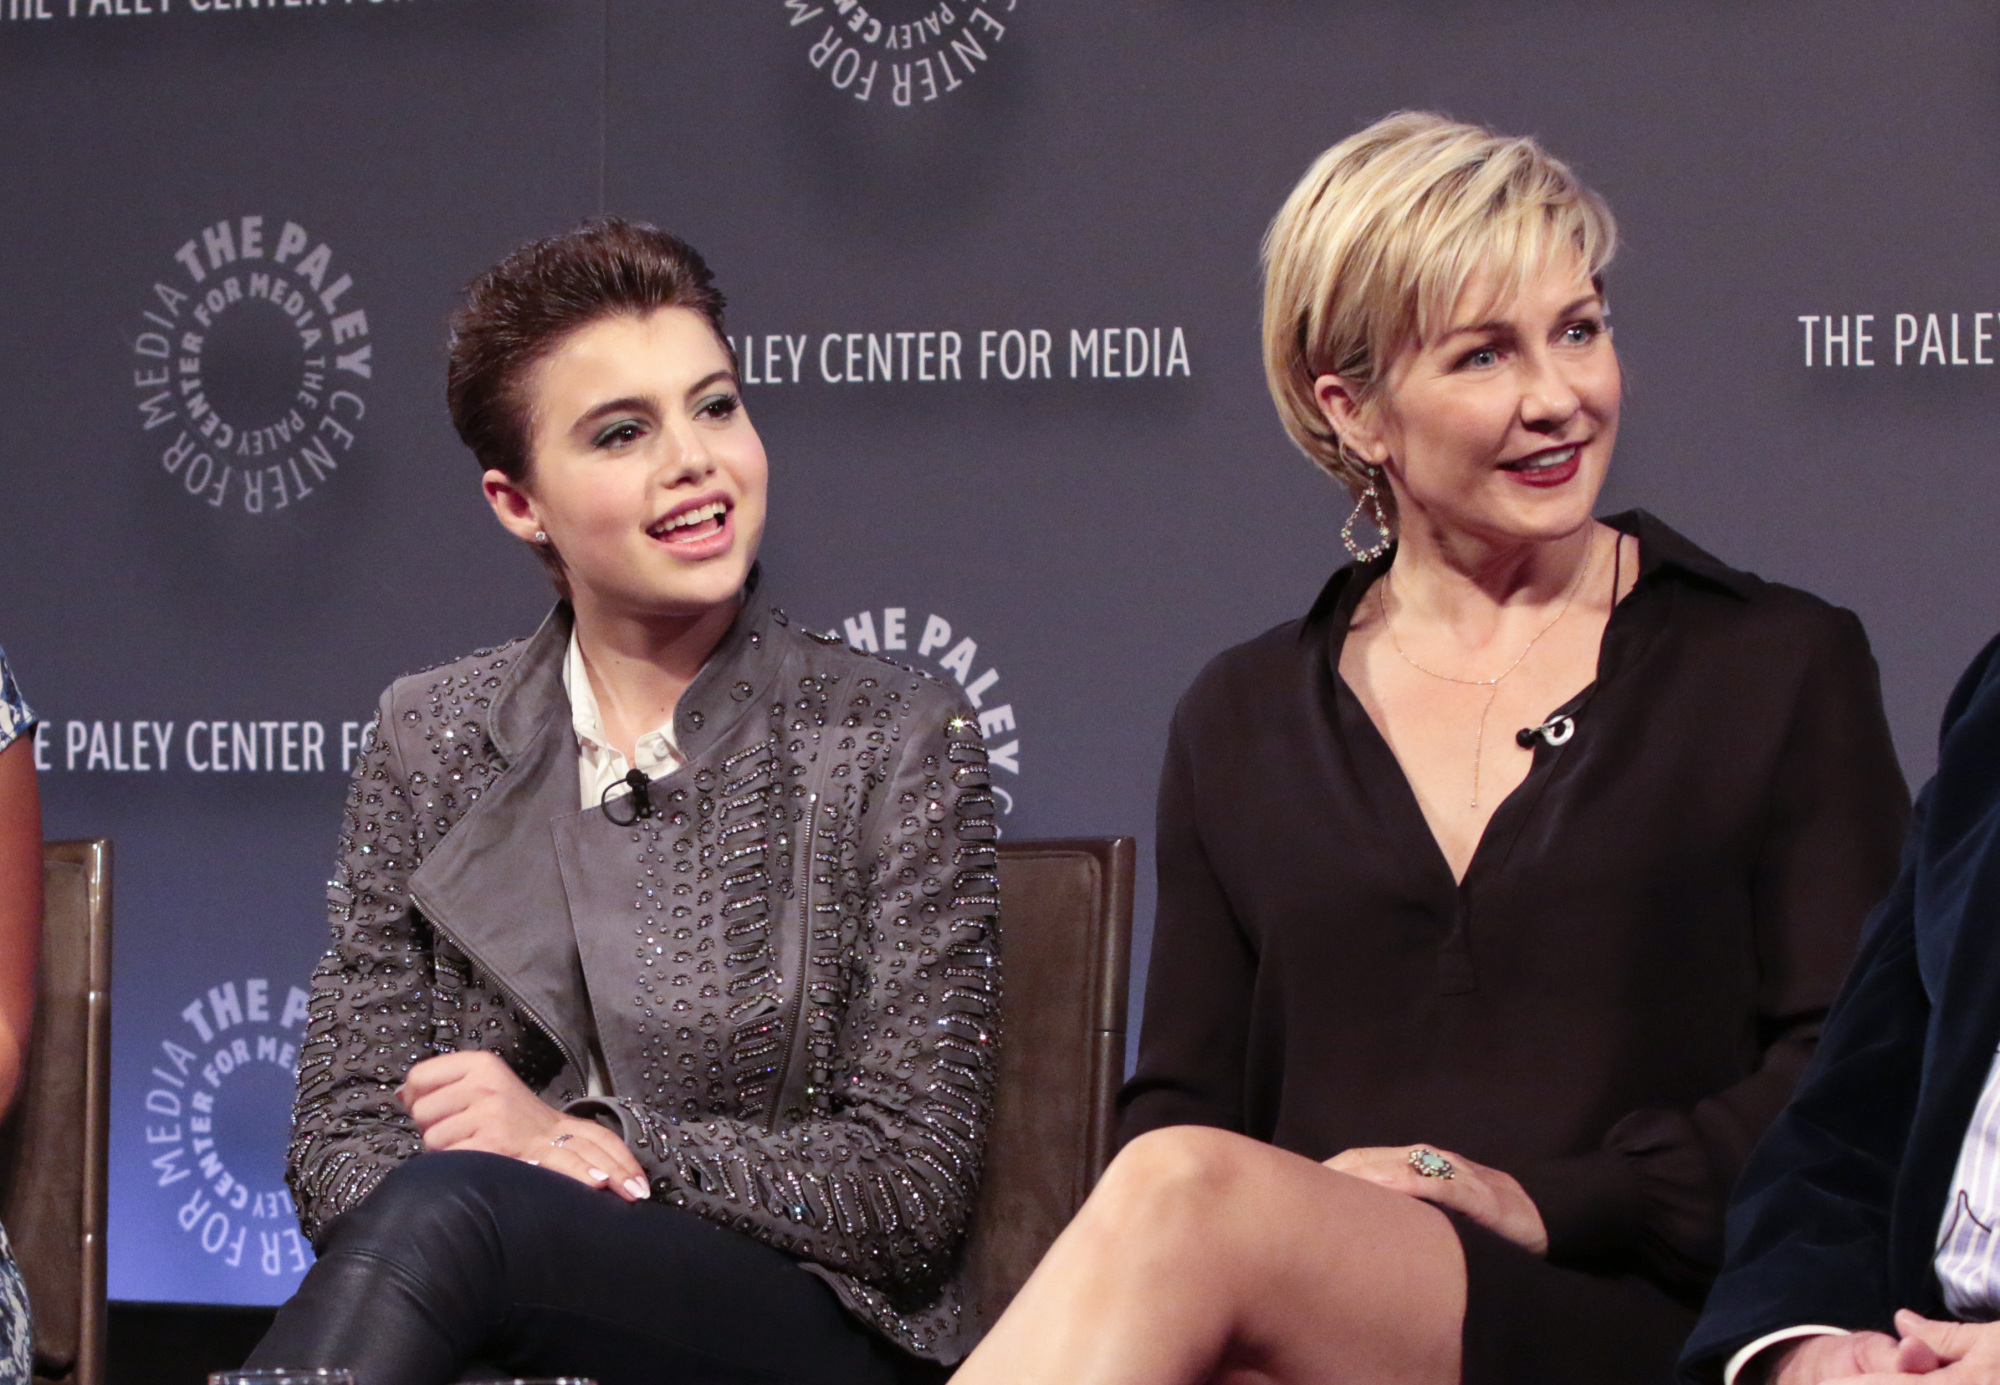 6. Sami Gayle and Amy Carlson have awesome hairdos.